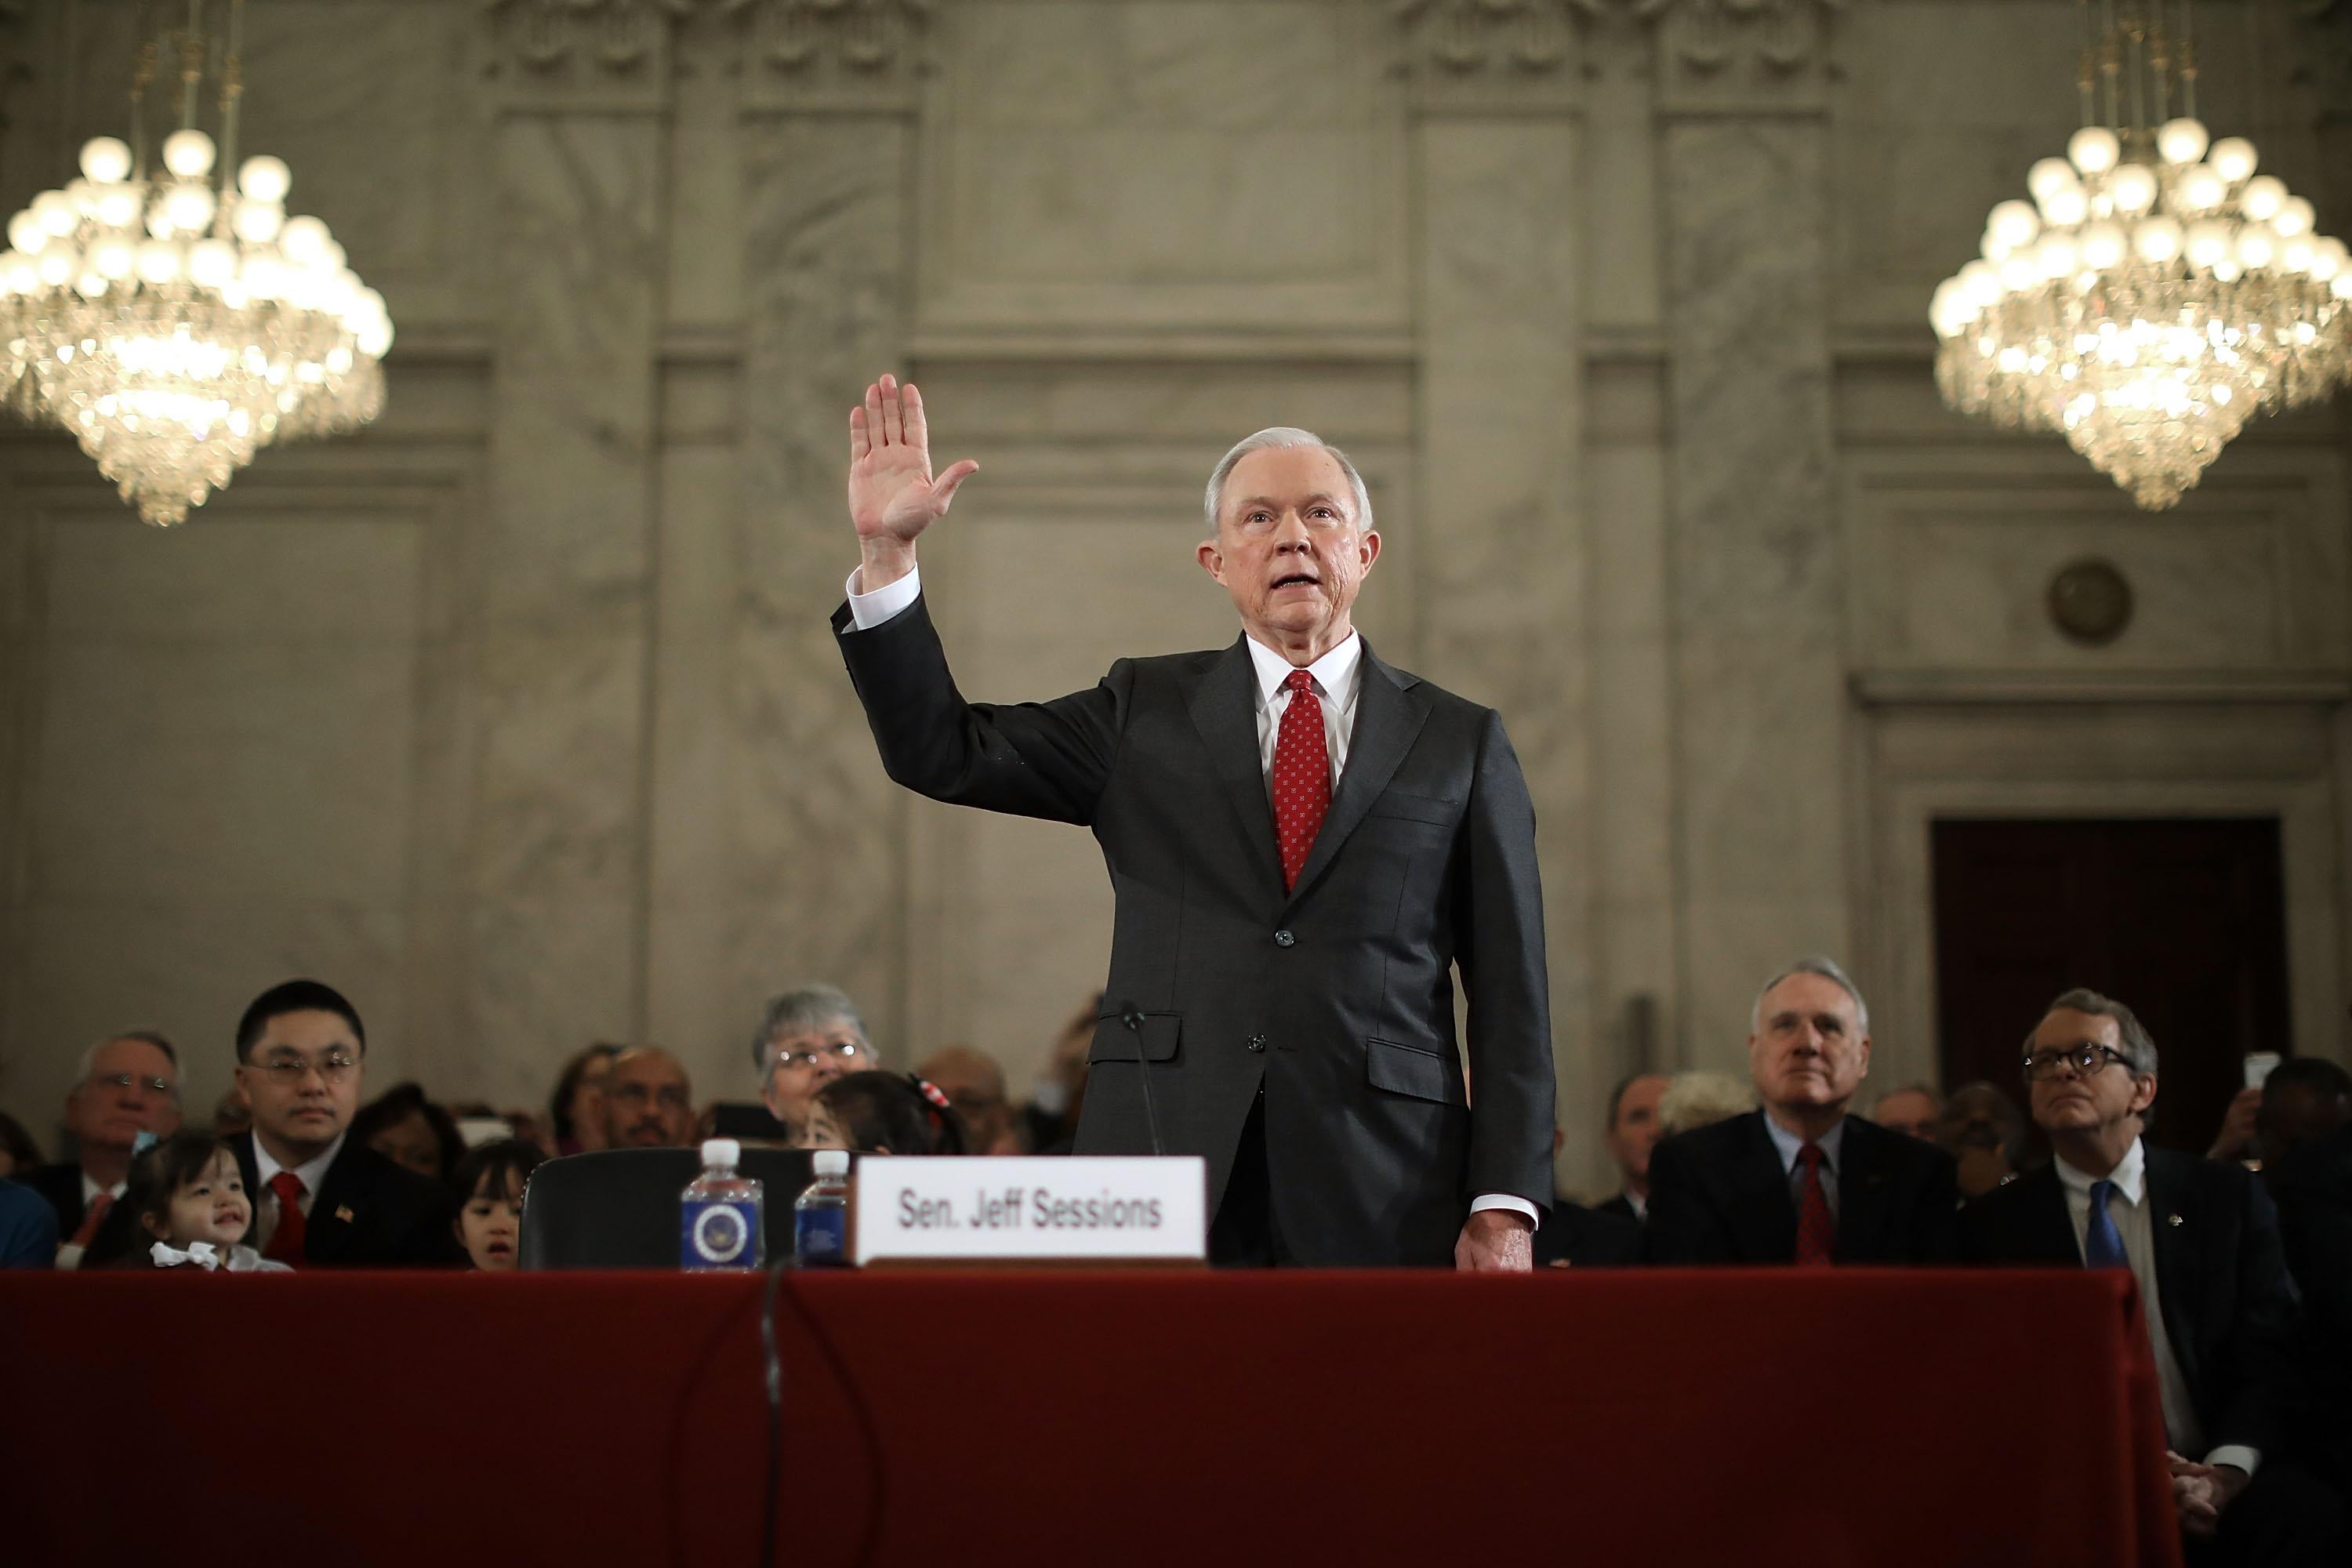 WASHINGTON, DC - JANUARY 10:  Sen. Jeff Sessions (R-AL) is sworn in before the Senate Judiciary Committee during his confirmation hearing to be the U.S. attorney general January 10, 2017 in Washington, DC. Sessions was one of the first members of Congress to endorse and support President-elect Donald Trump, who nominated him for Attorney General.  (Photo by Chip Somodevilla/Getty Images)